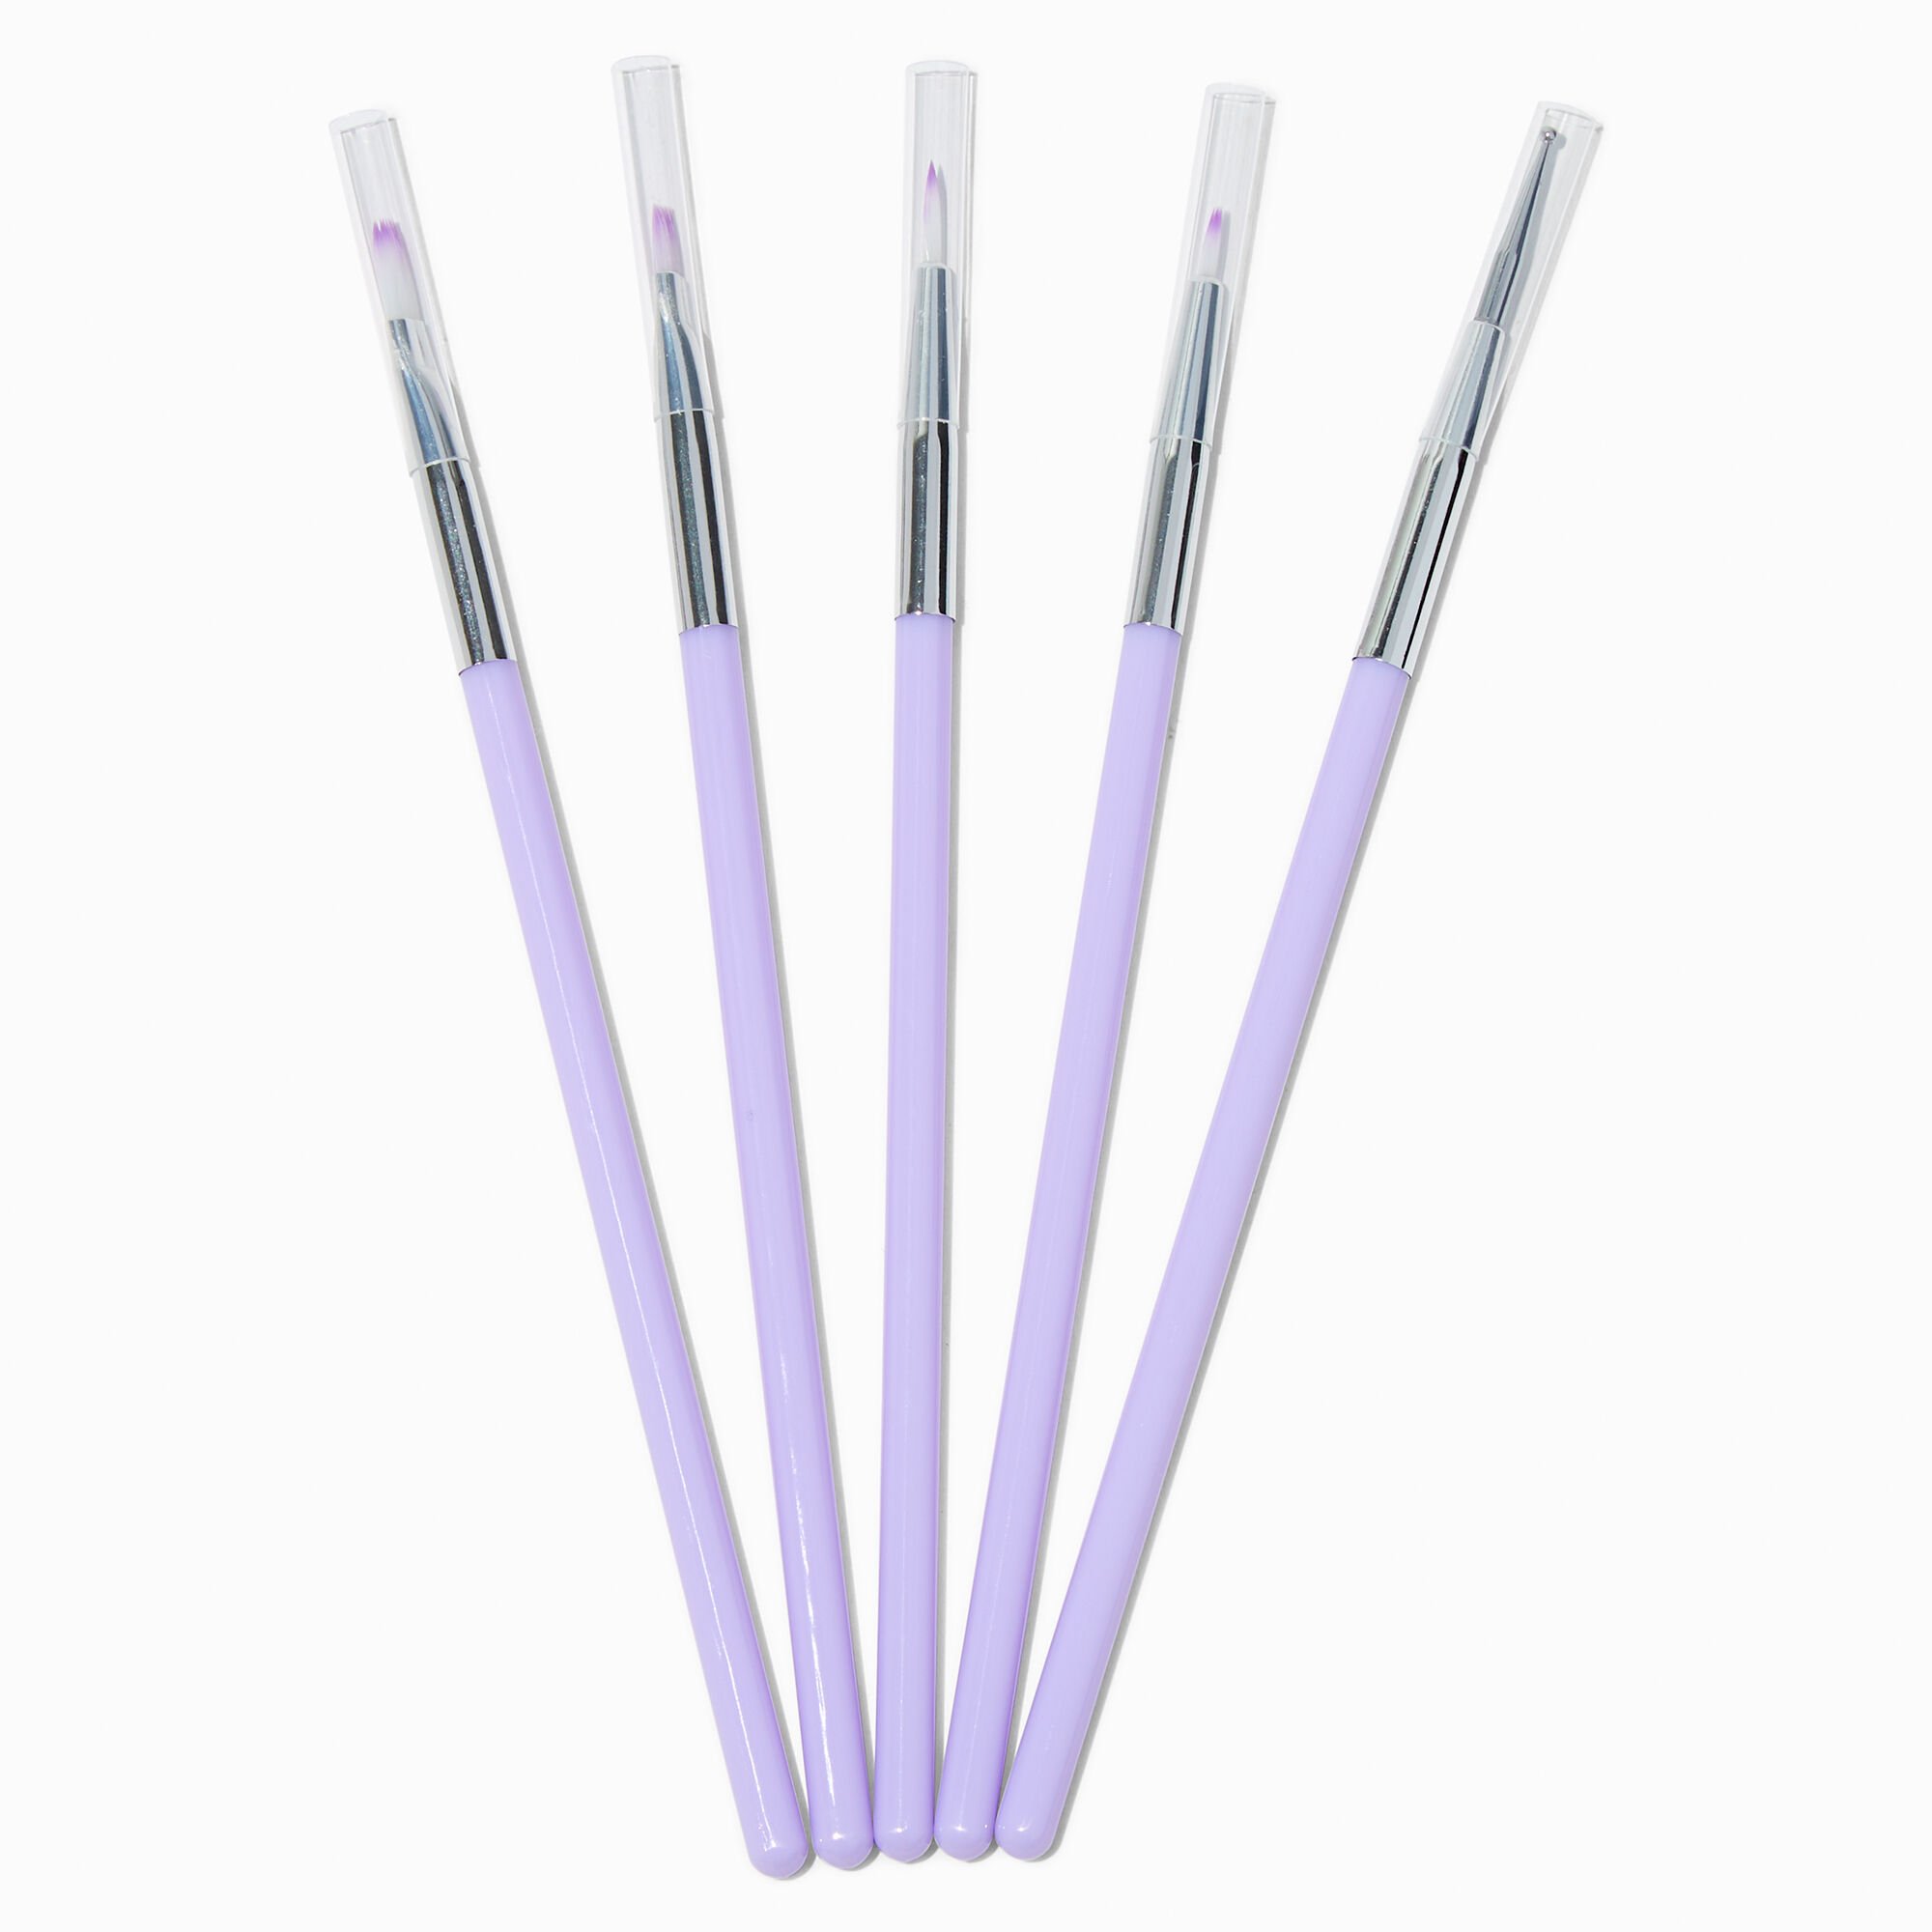 View Claires Nail Art Brush Set 5 Pack Purple information